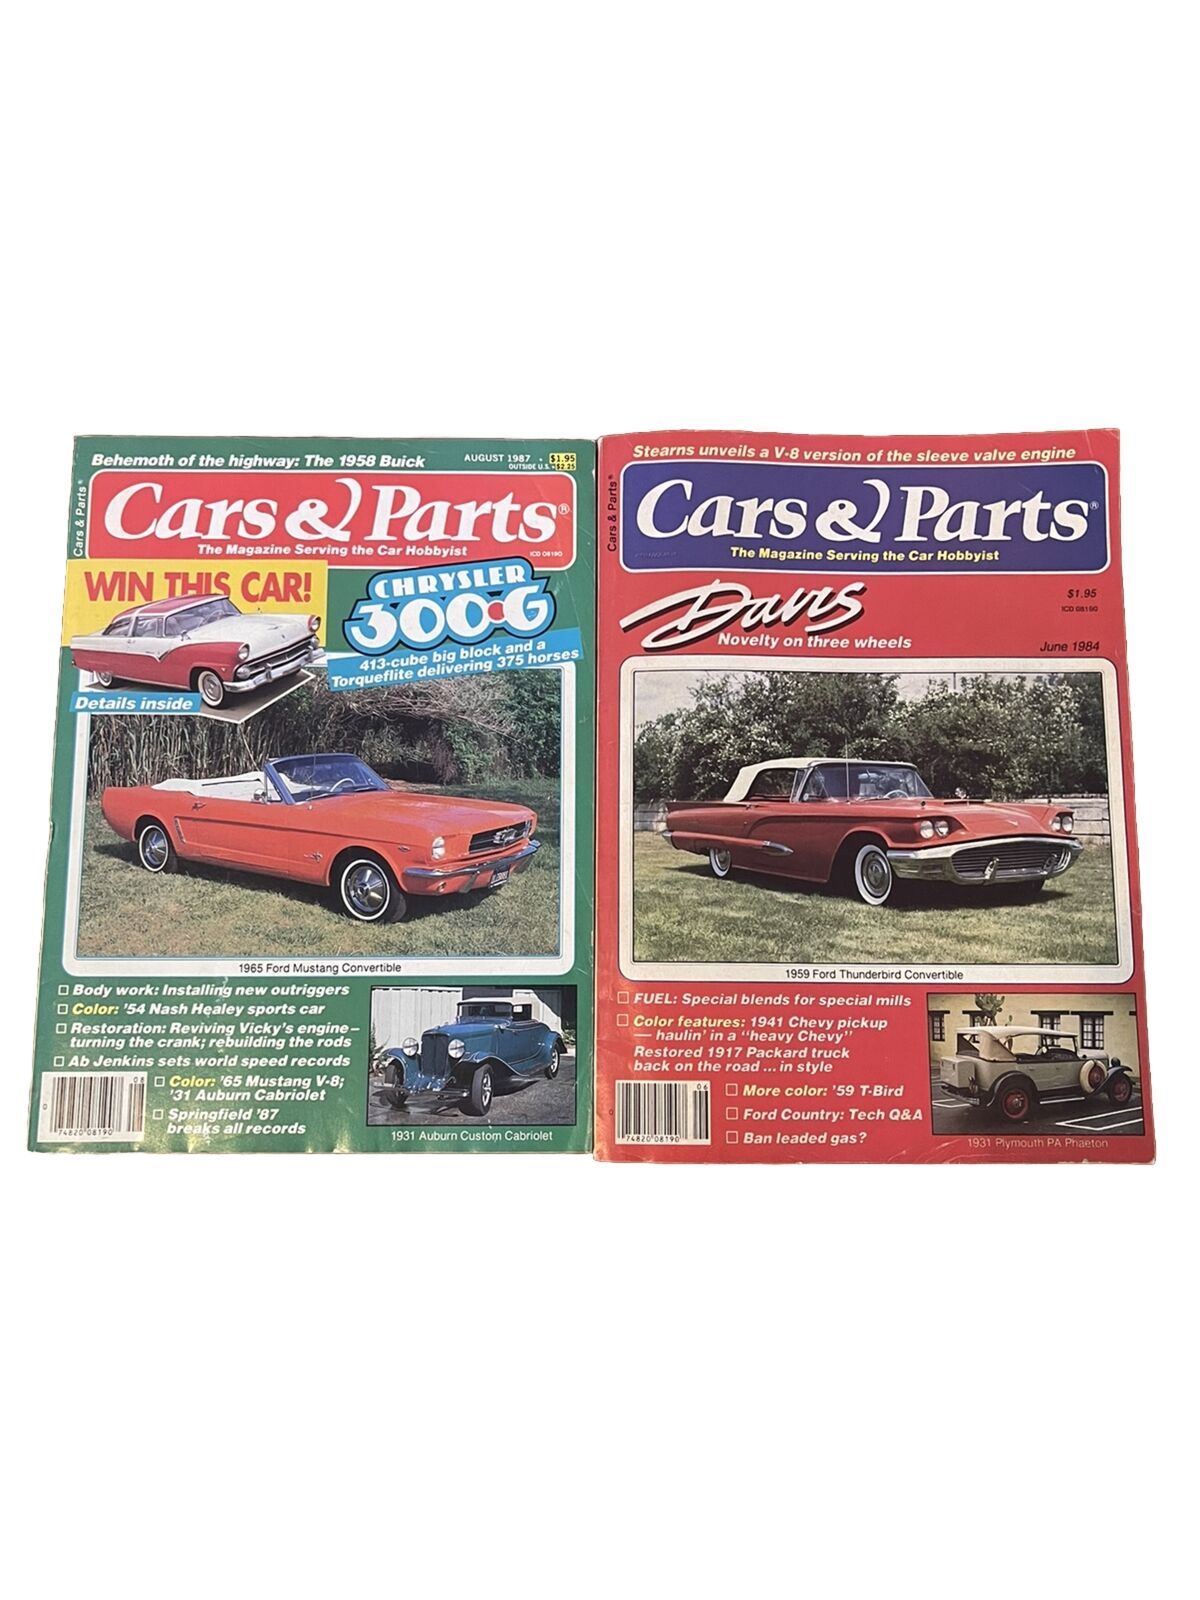 Cars & Parts Magazine June 1984 Aug 1987 Chevy Dodge Ford Truck Hotrod LOT OF 2